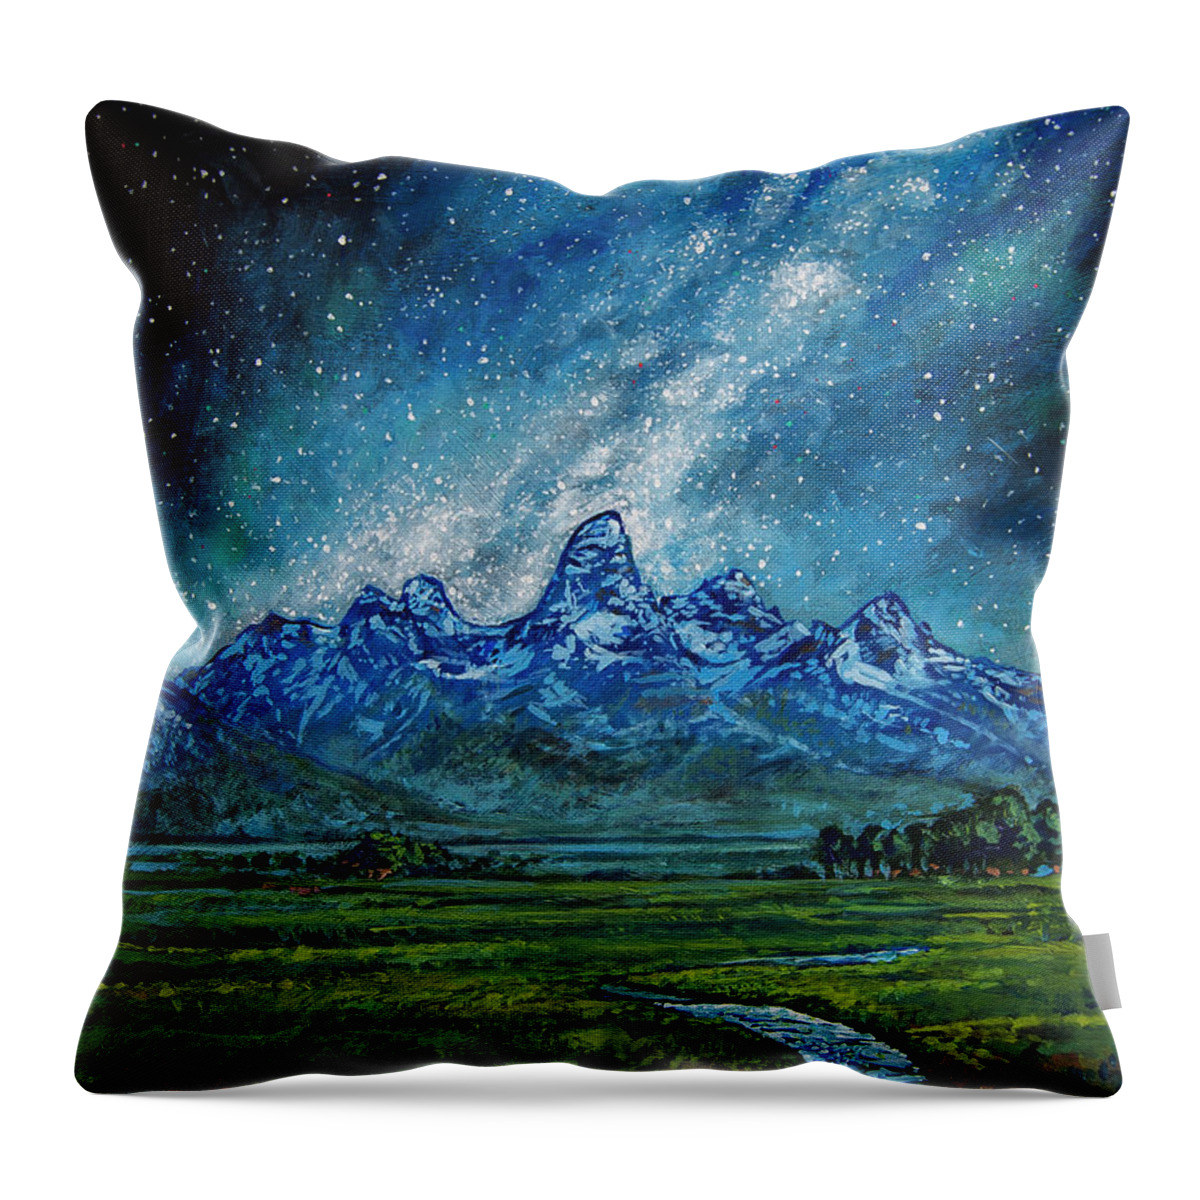 Grand Teton Throw Pillow featuring the painting Teton Milky Way by Aaron Spong